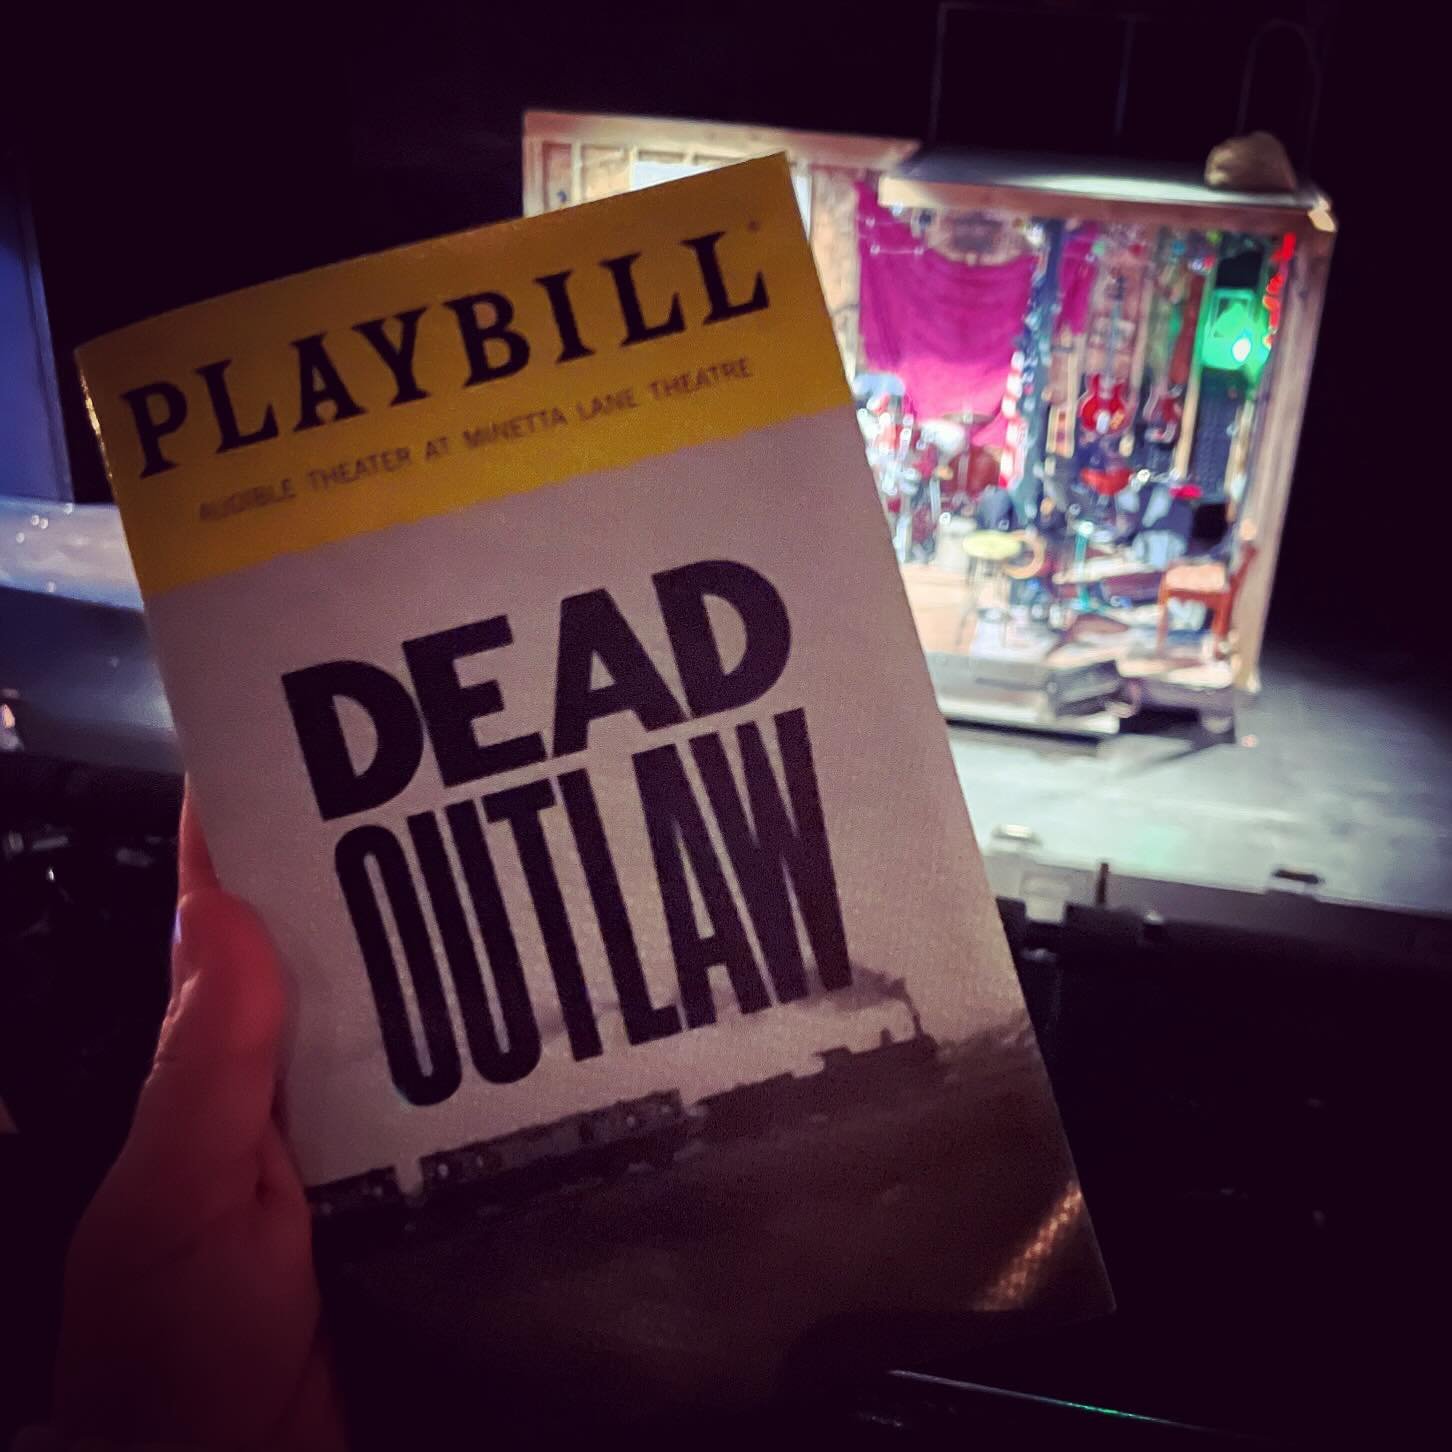 I knew nothing about this show going into it and throughly enjoyed the journey. Also so great to hear @spencecohen in the band! 

#deadoutlaw #tonightsplaybill #nyc #livetheater